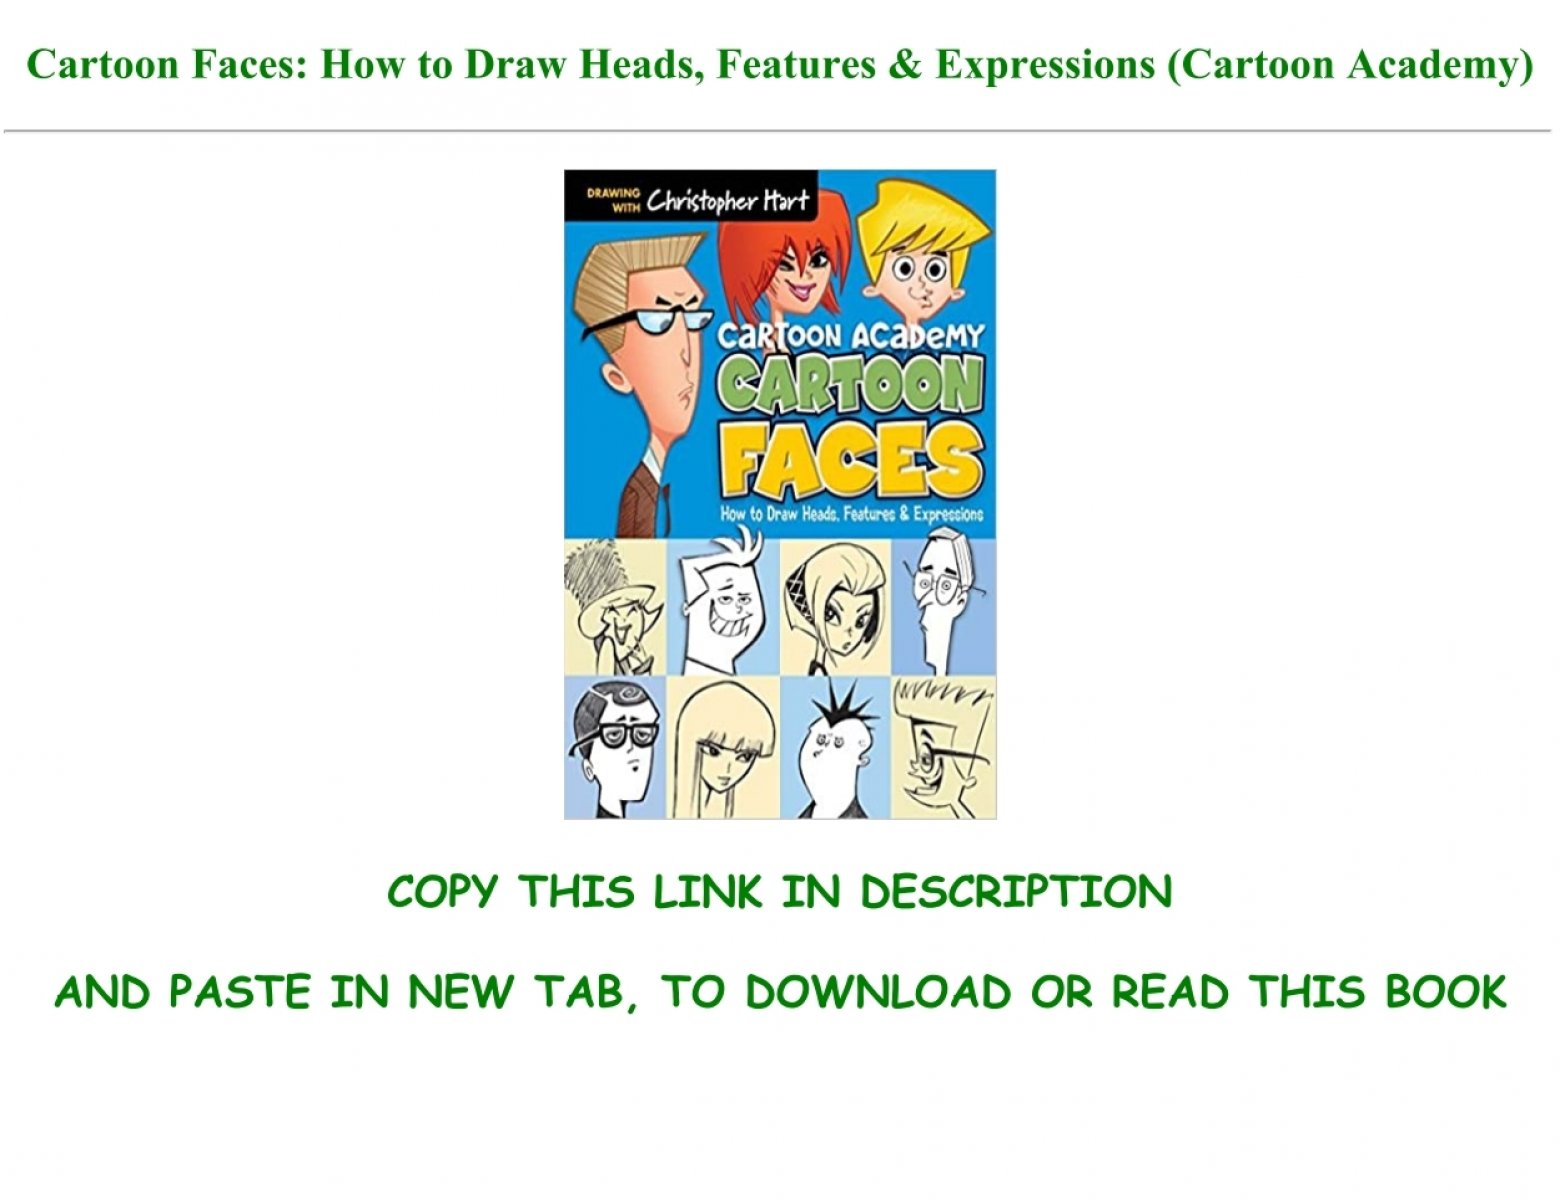 (B.O.O.K.$) Cartoon Faces: How to Draw Heads, Features & Expressions